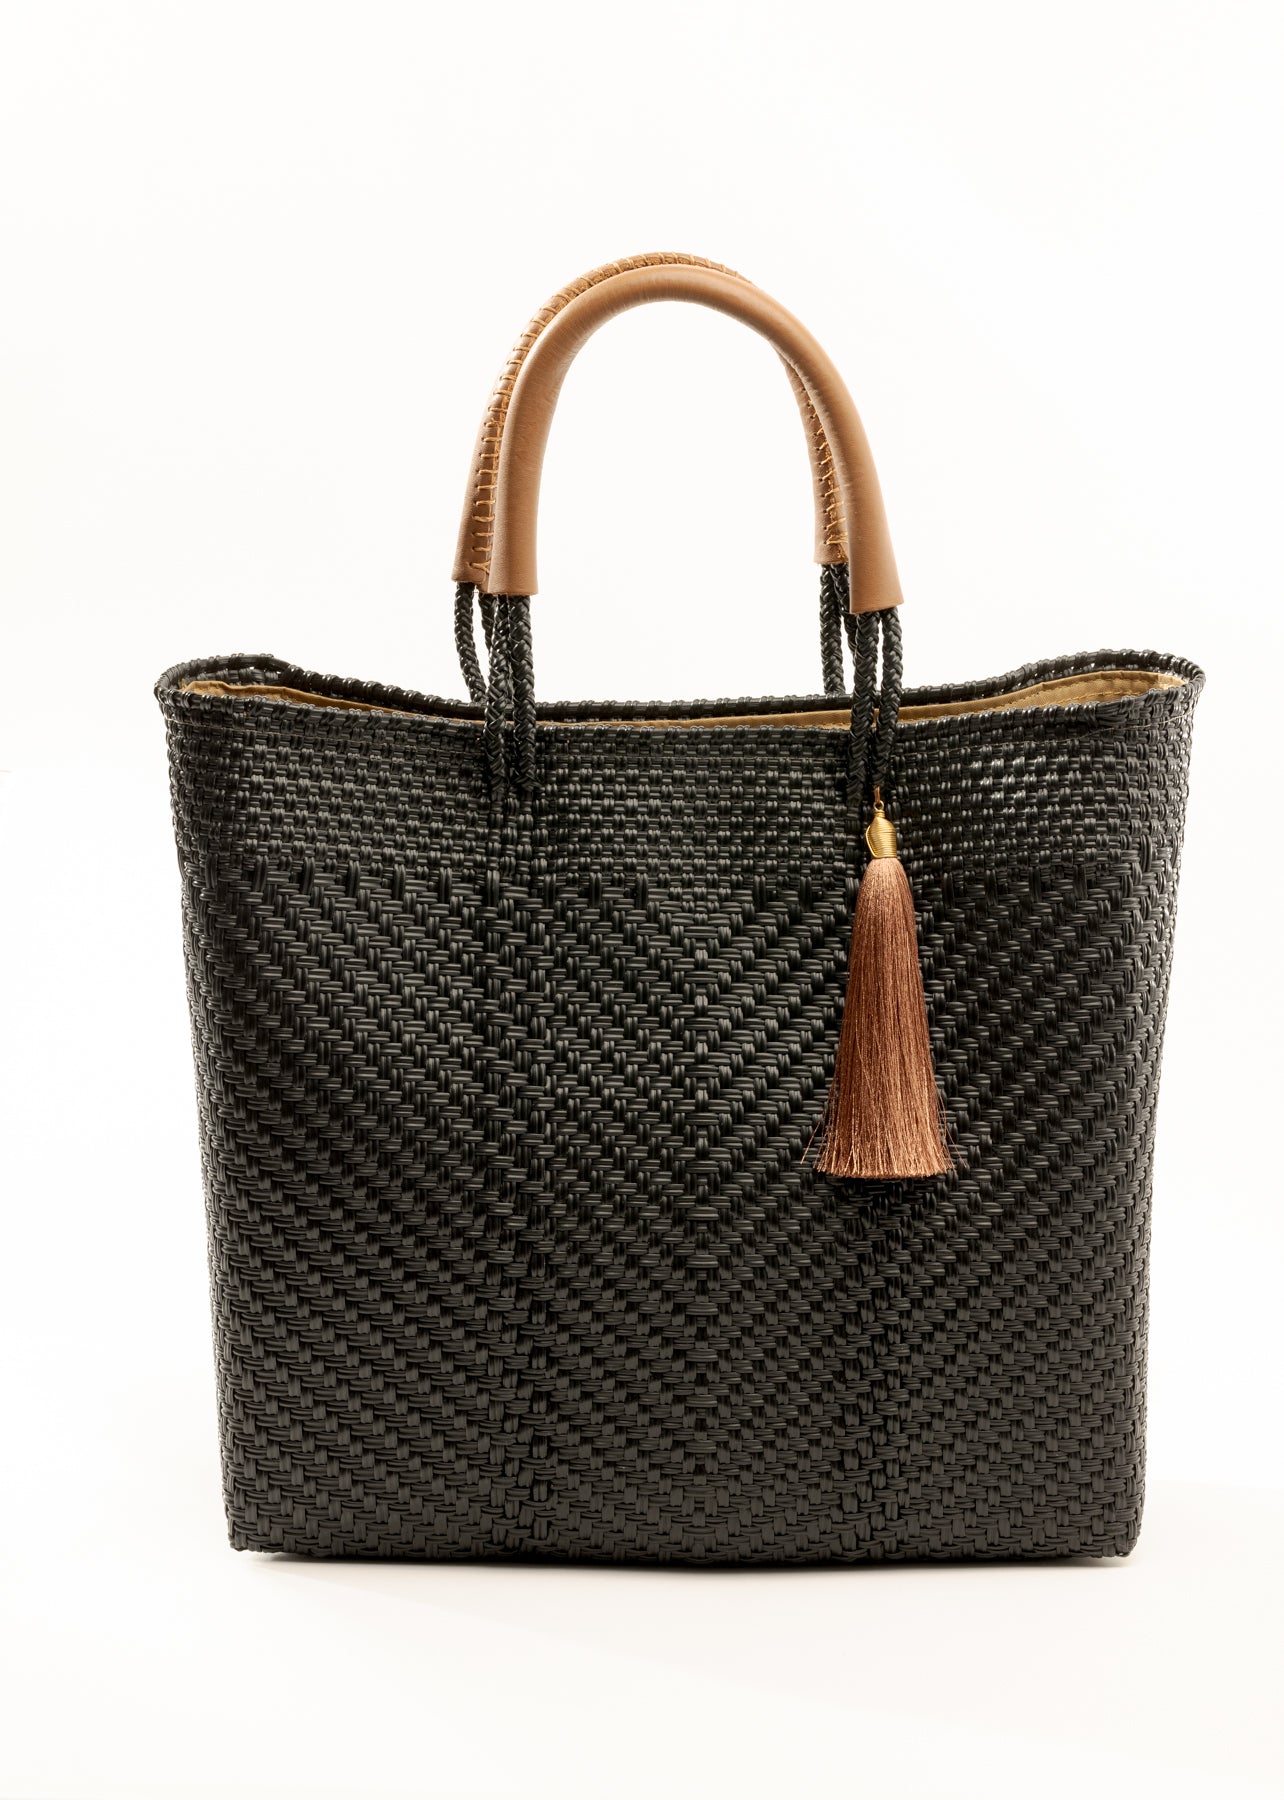 Black and brown woven bucket bag made from recycled plastics featuring tan leather handles and tassel detail